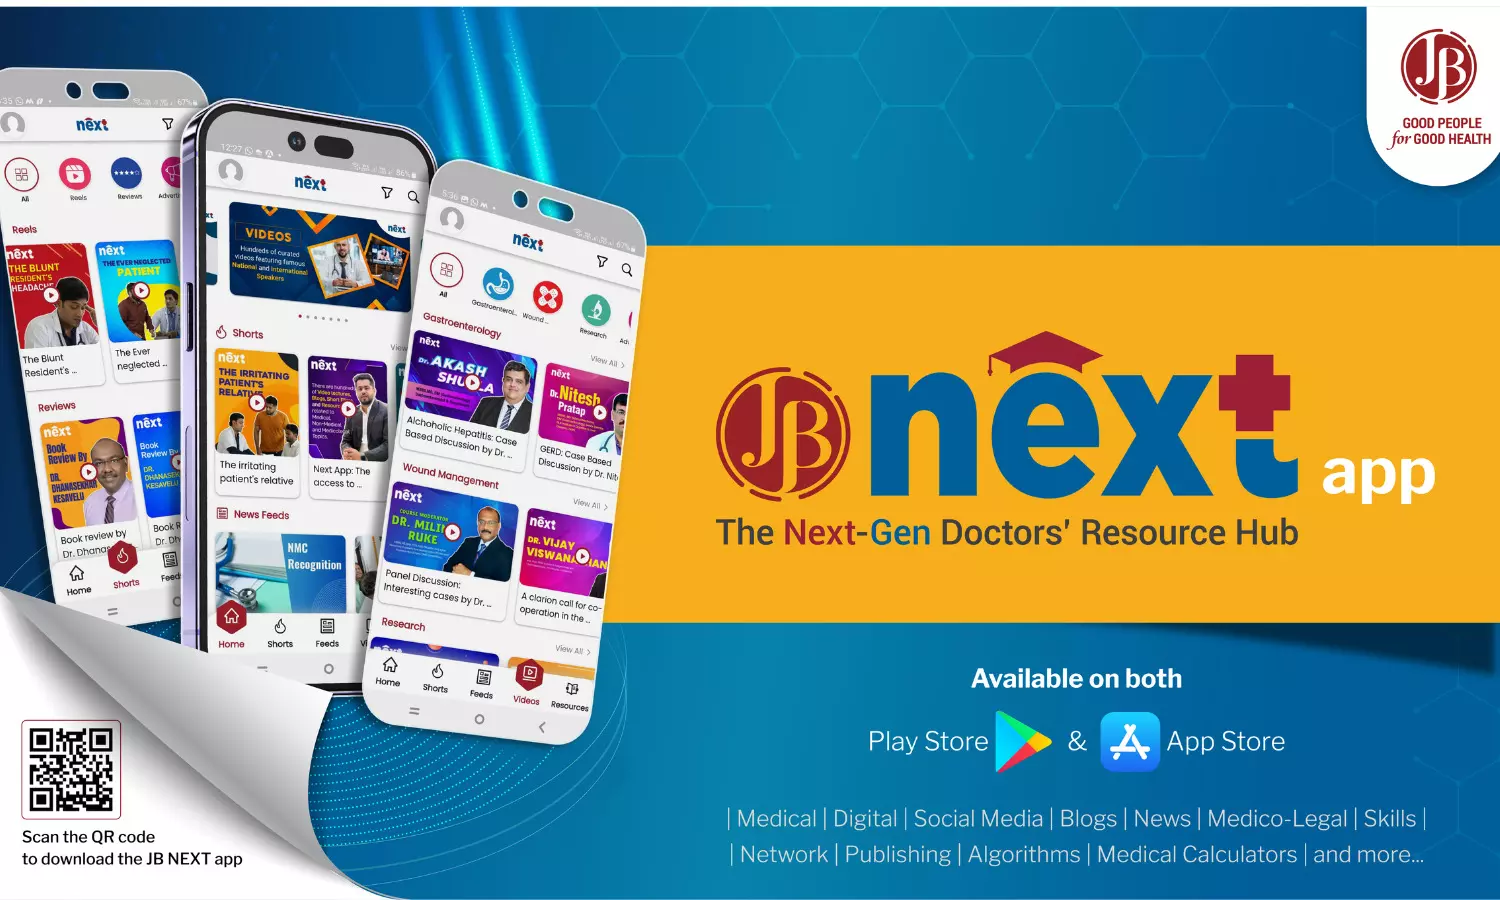 JB Pharma Launches “JB NEXT”, A Comprehensive Knowledge Based App for Doctors